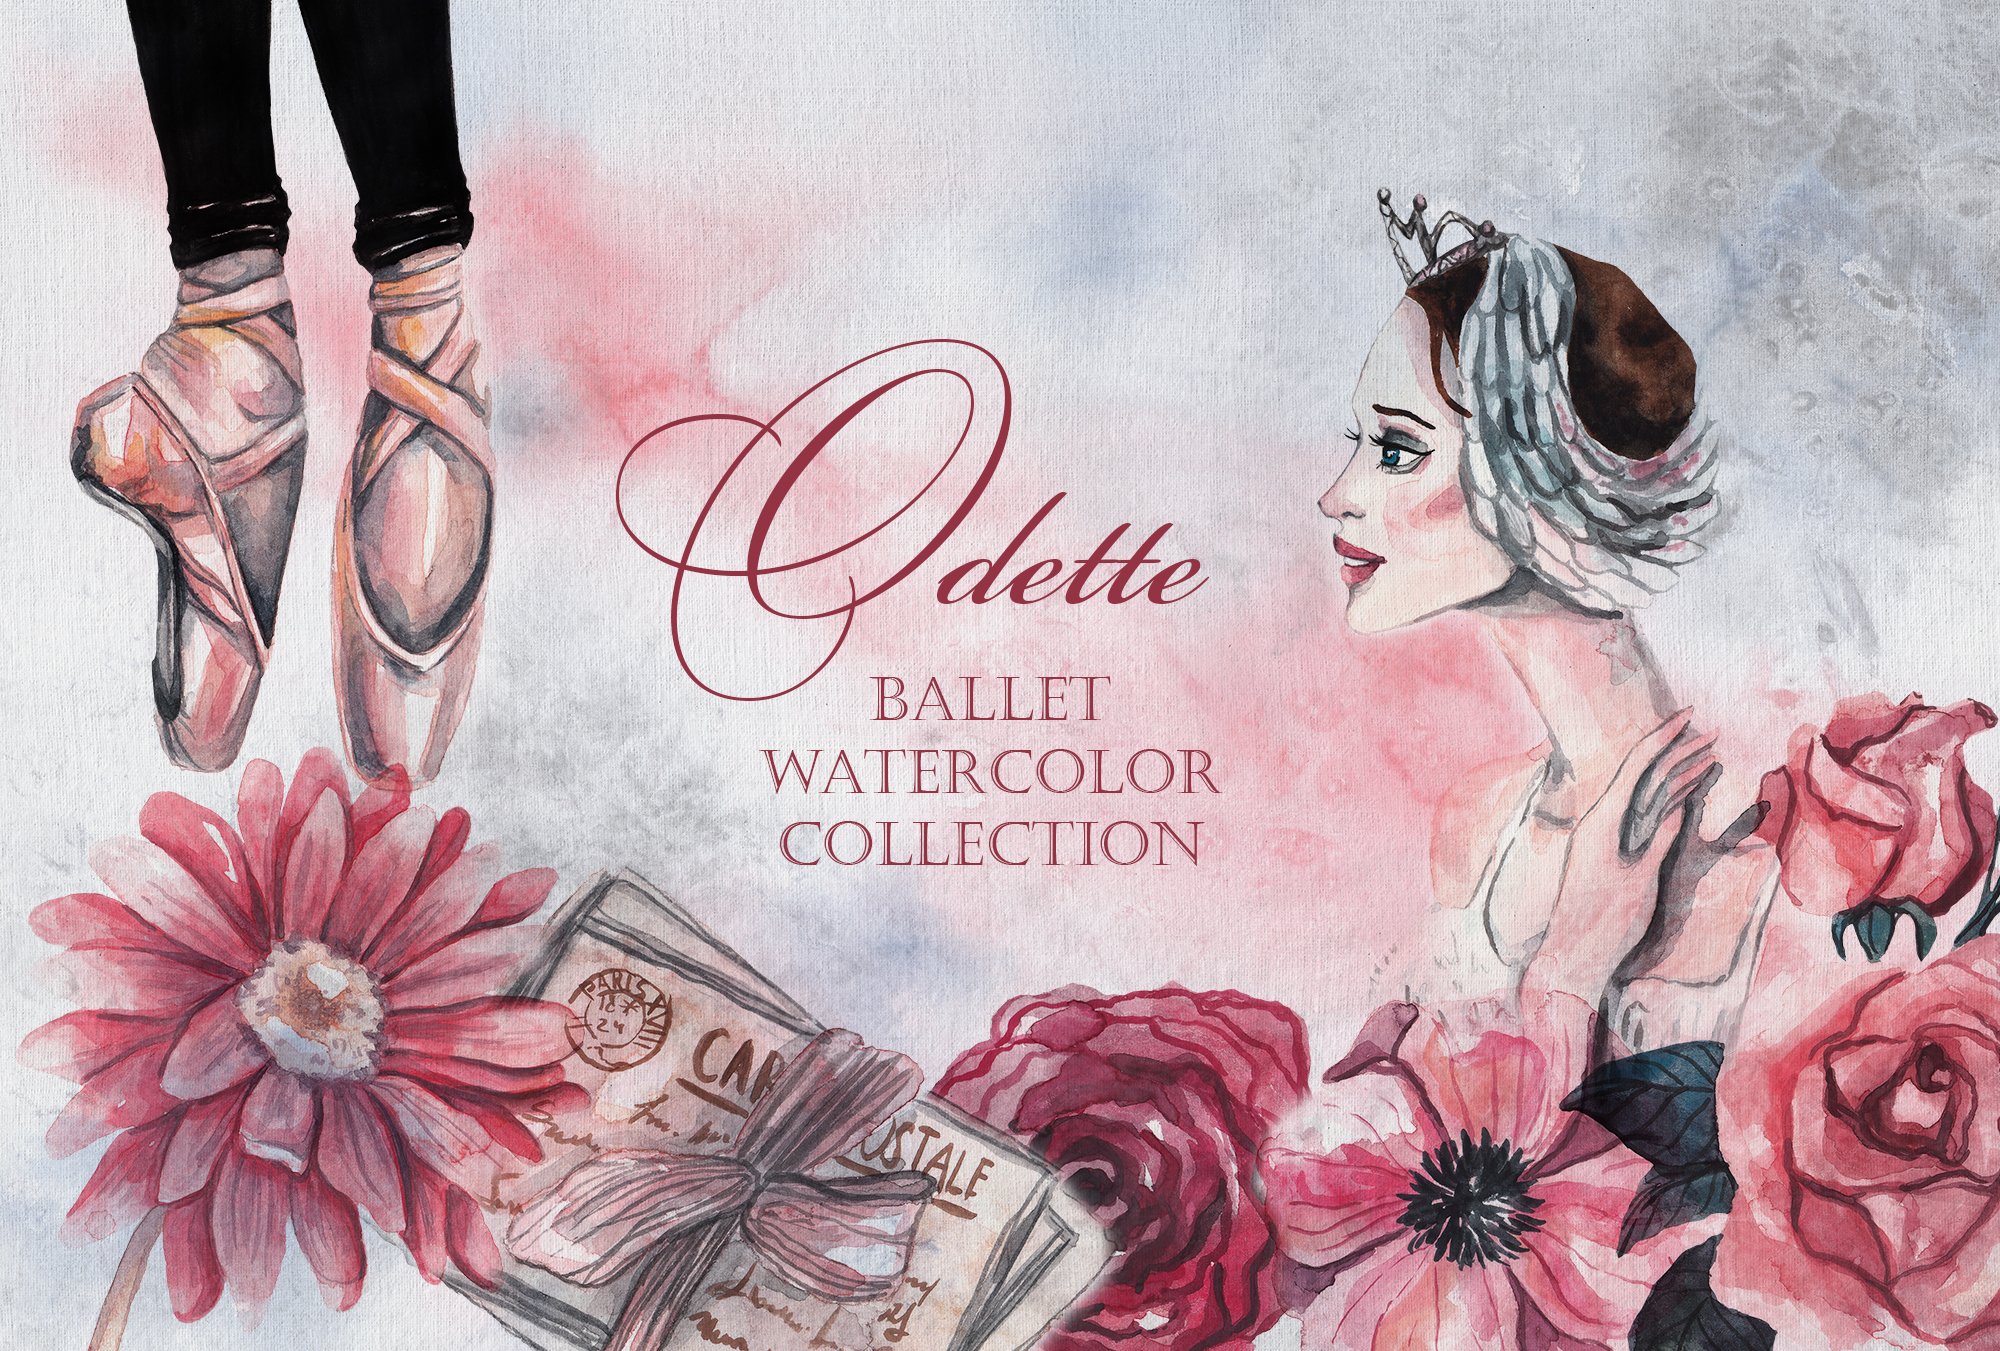 Odette. Ballet watercolor collection cover image.